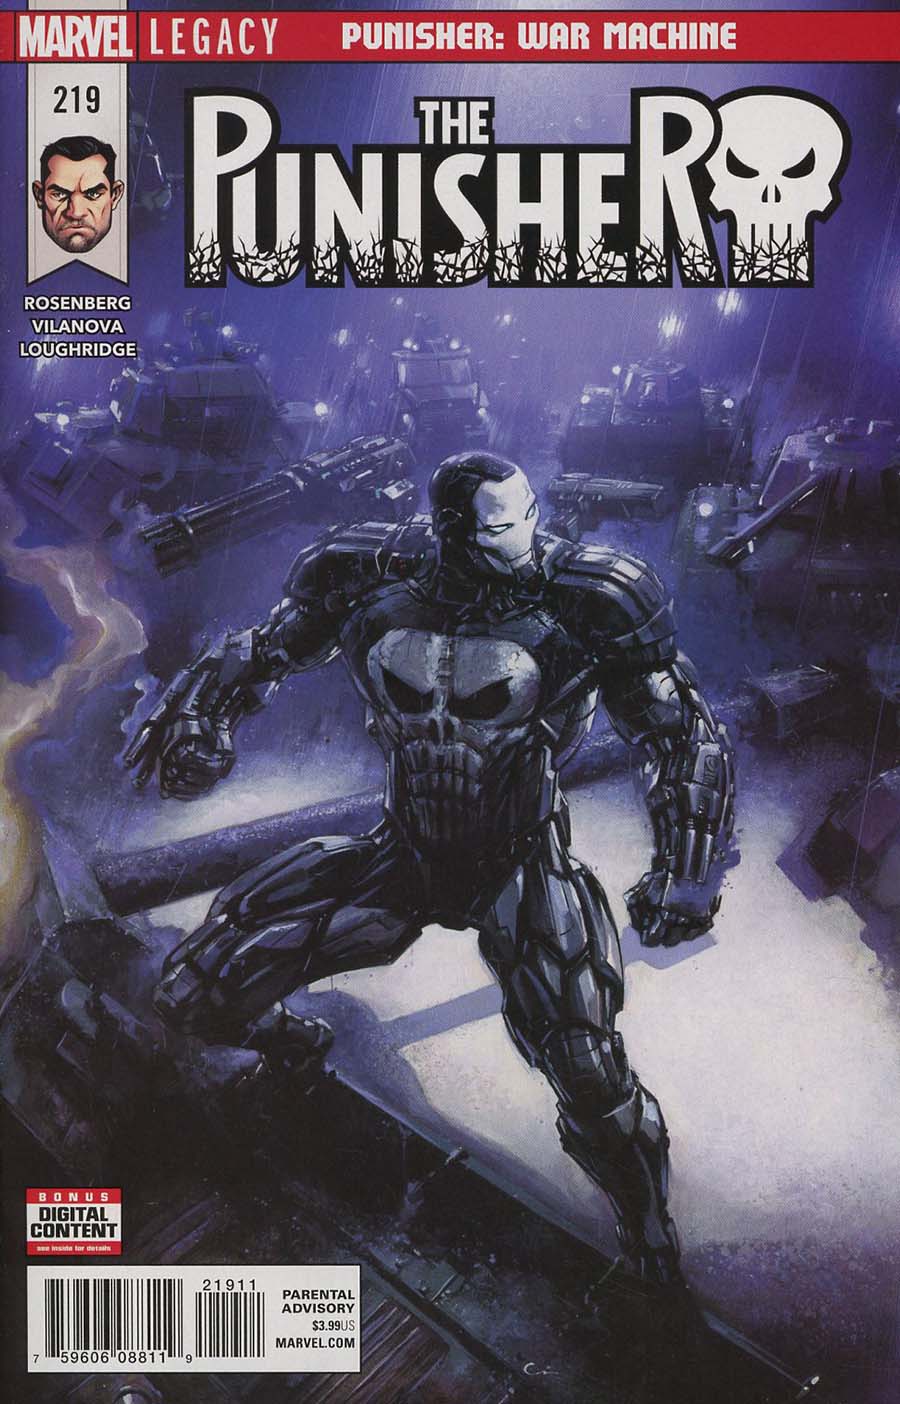 Punisher Vol 10 #219 Cover A 1st Ptg Regular Clayton Crain Cover (Marvel Legacy Tie-In)